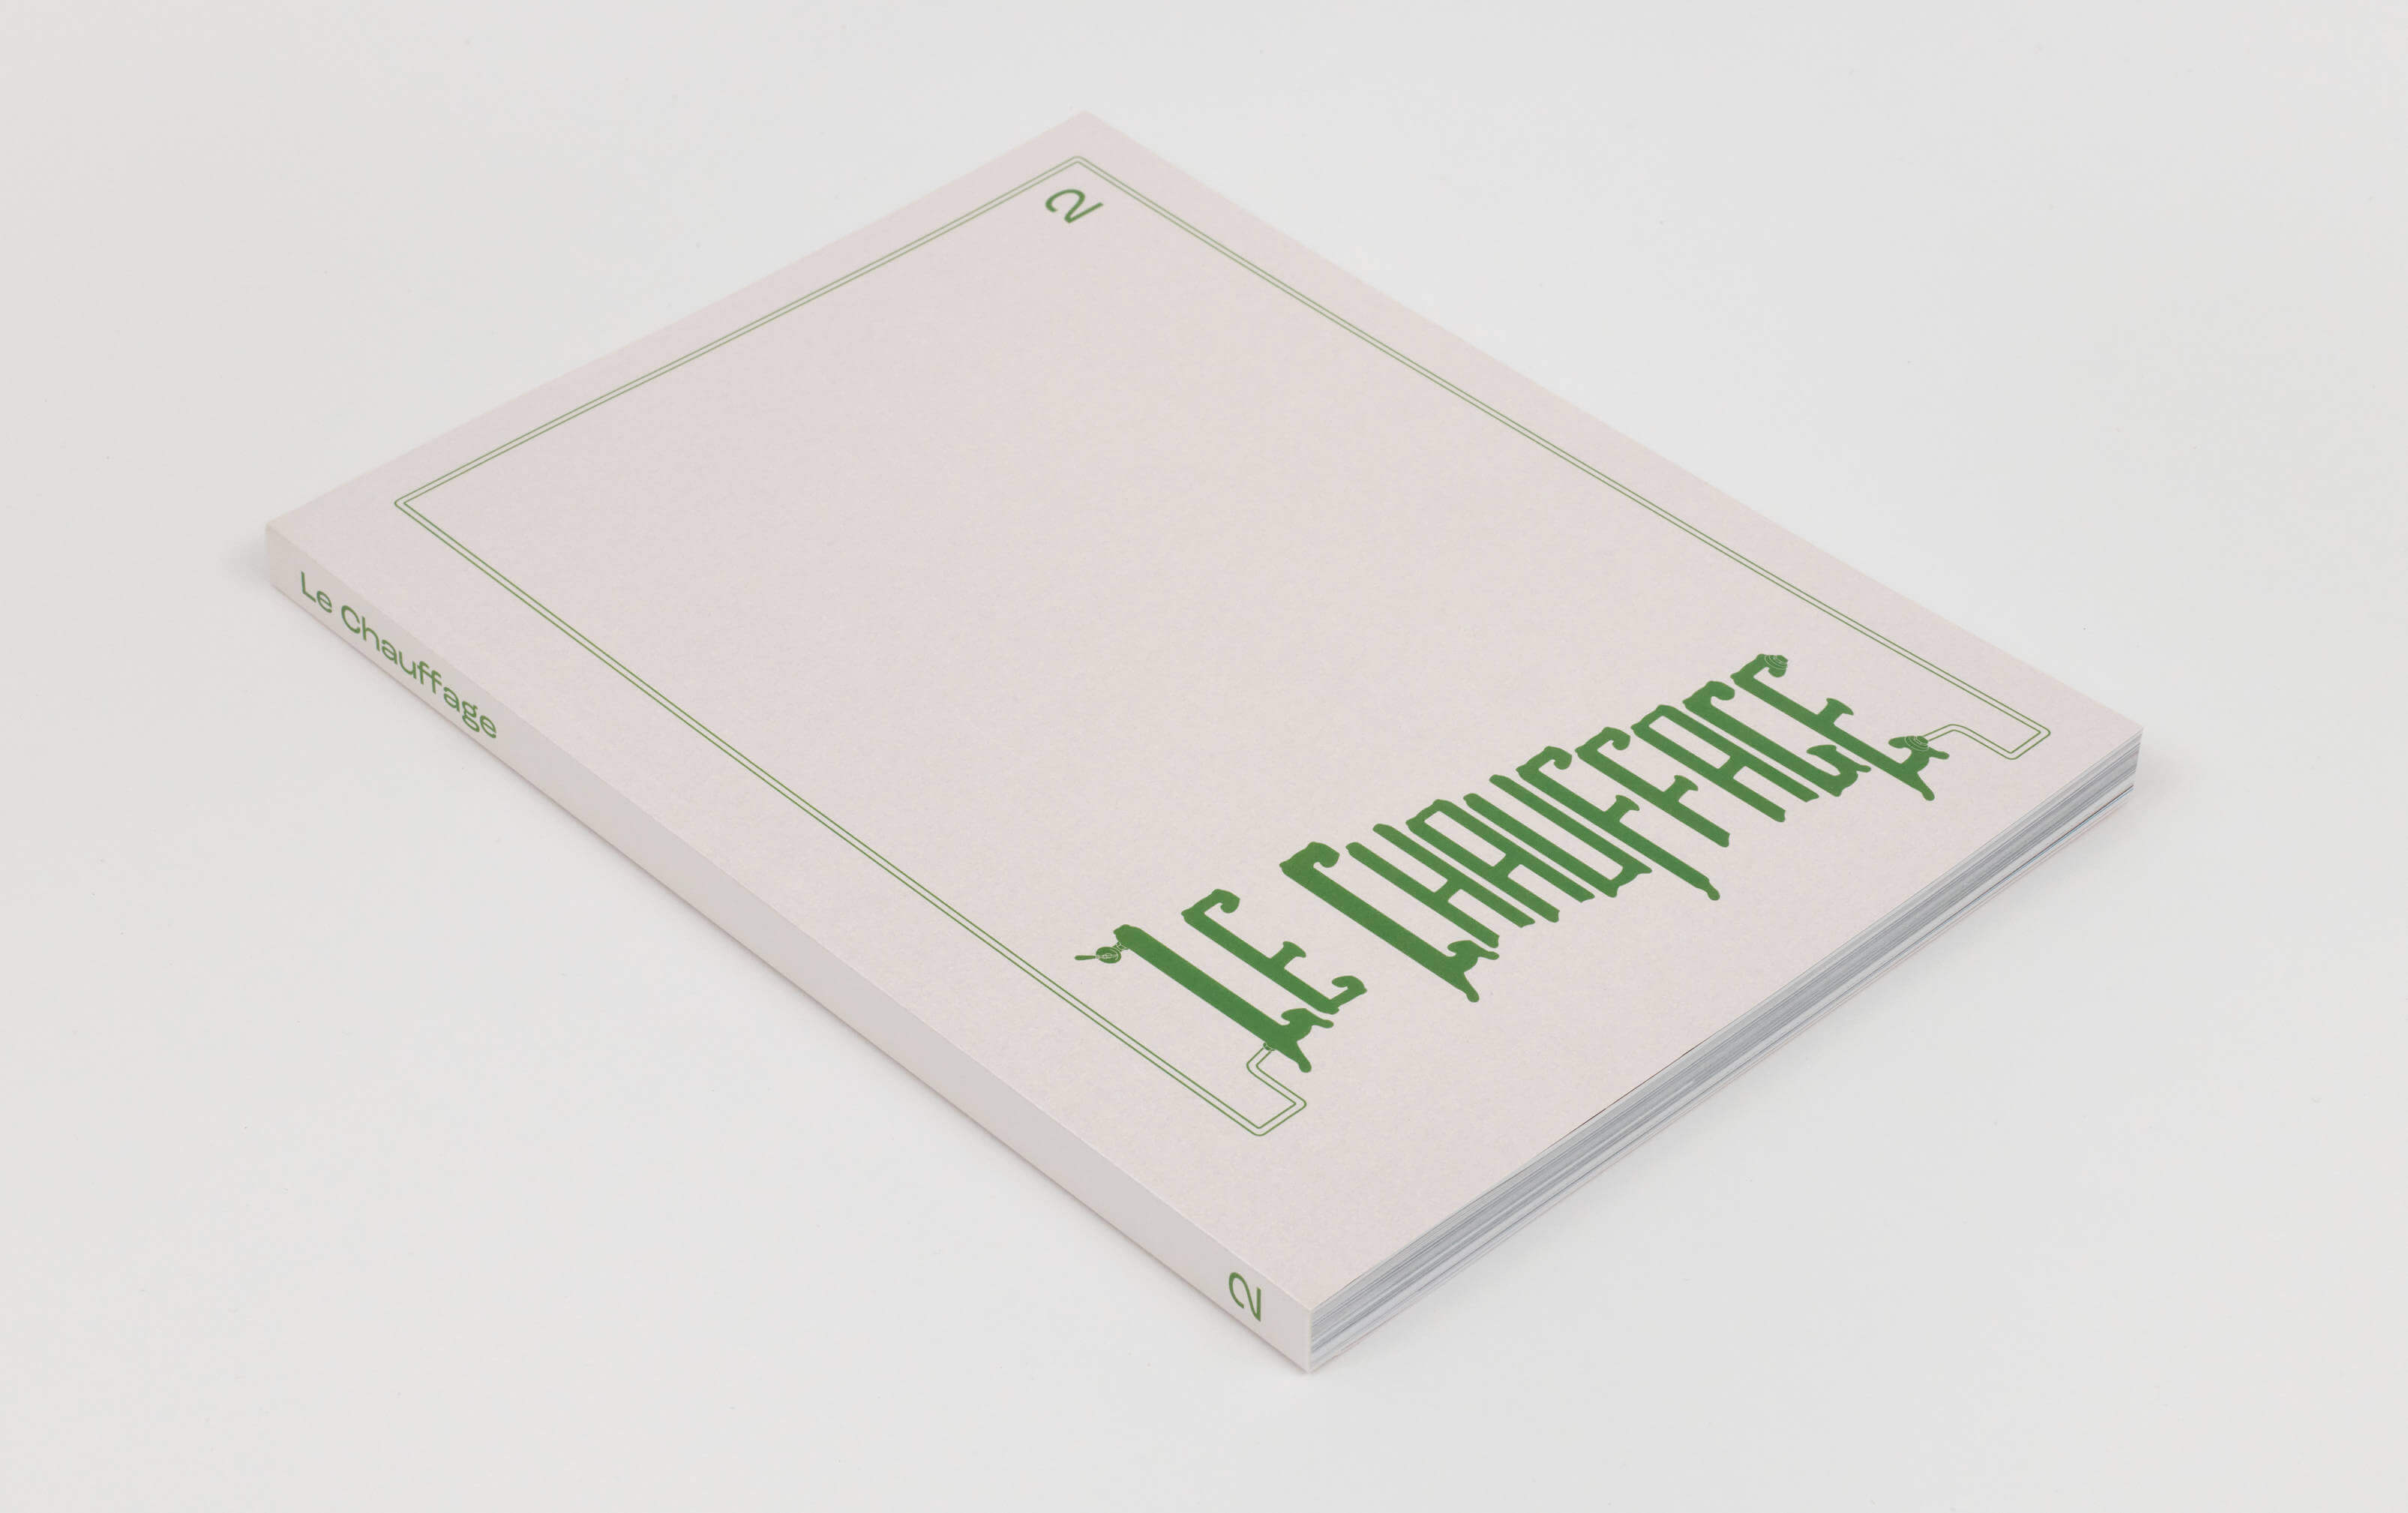 [Launch] Le Chauffage, Issue 02